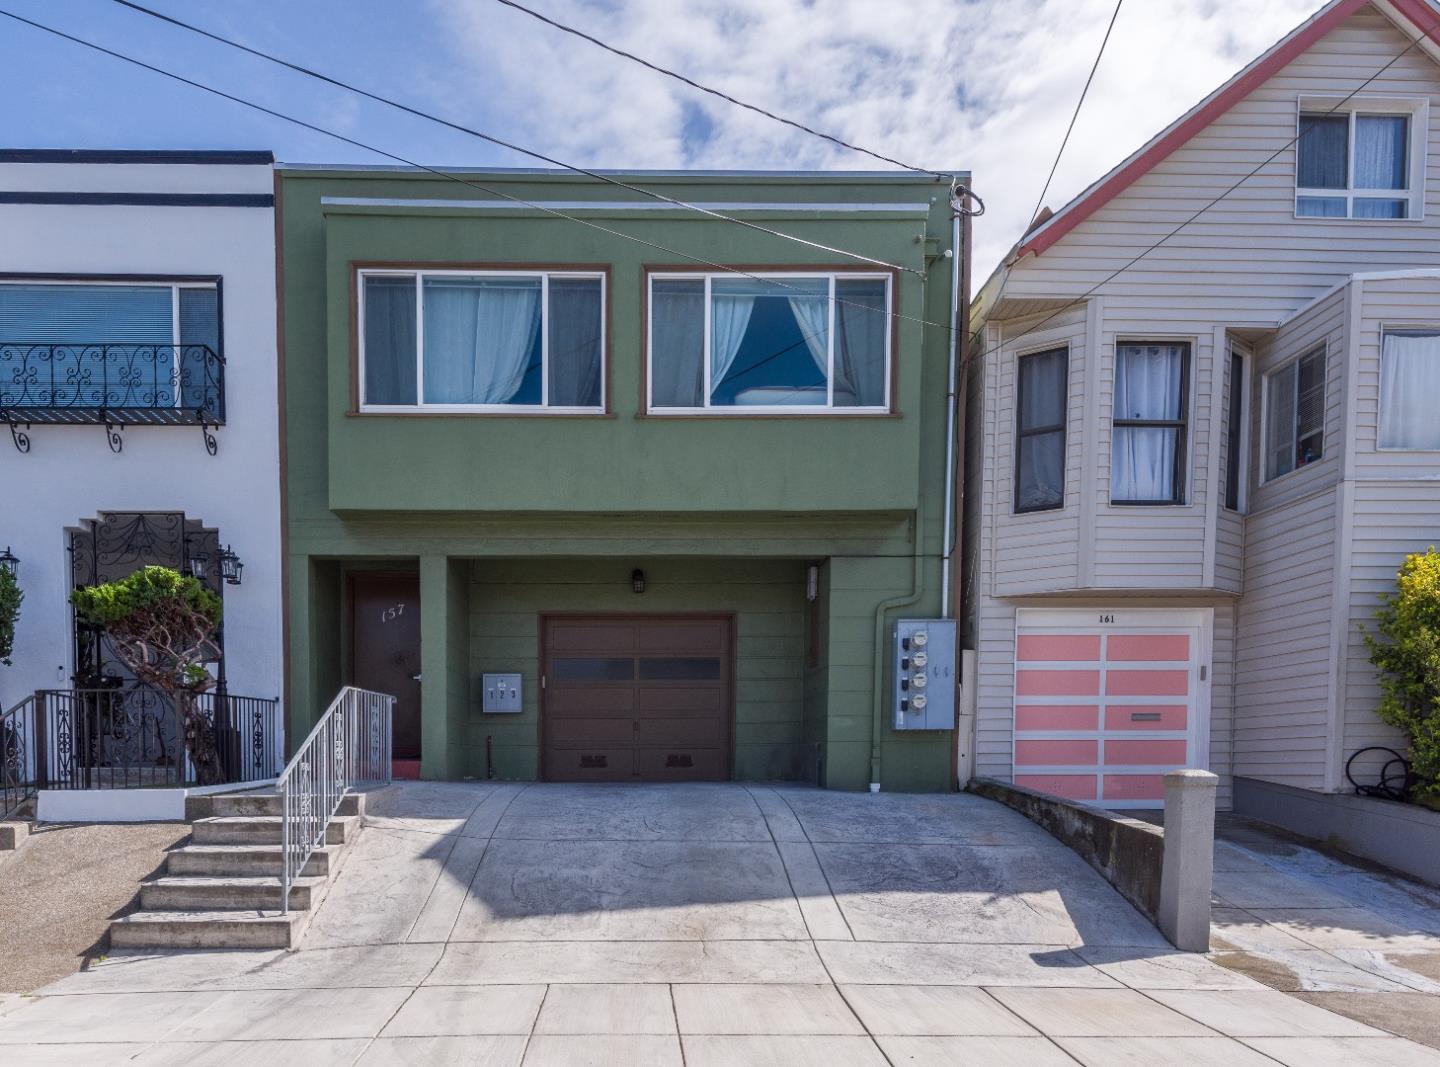 Photo of 157 Miriam St in Daly City, CA